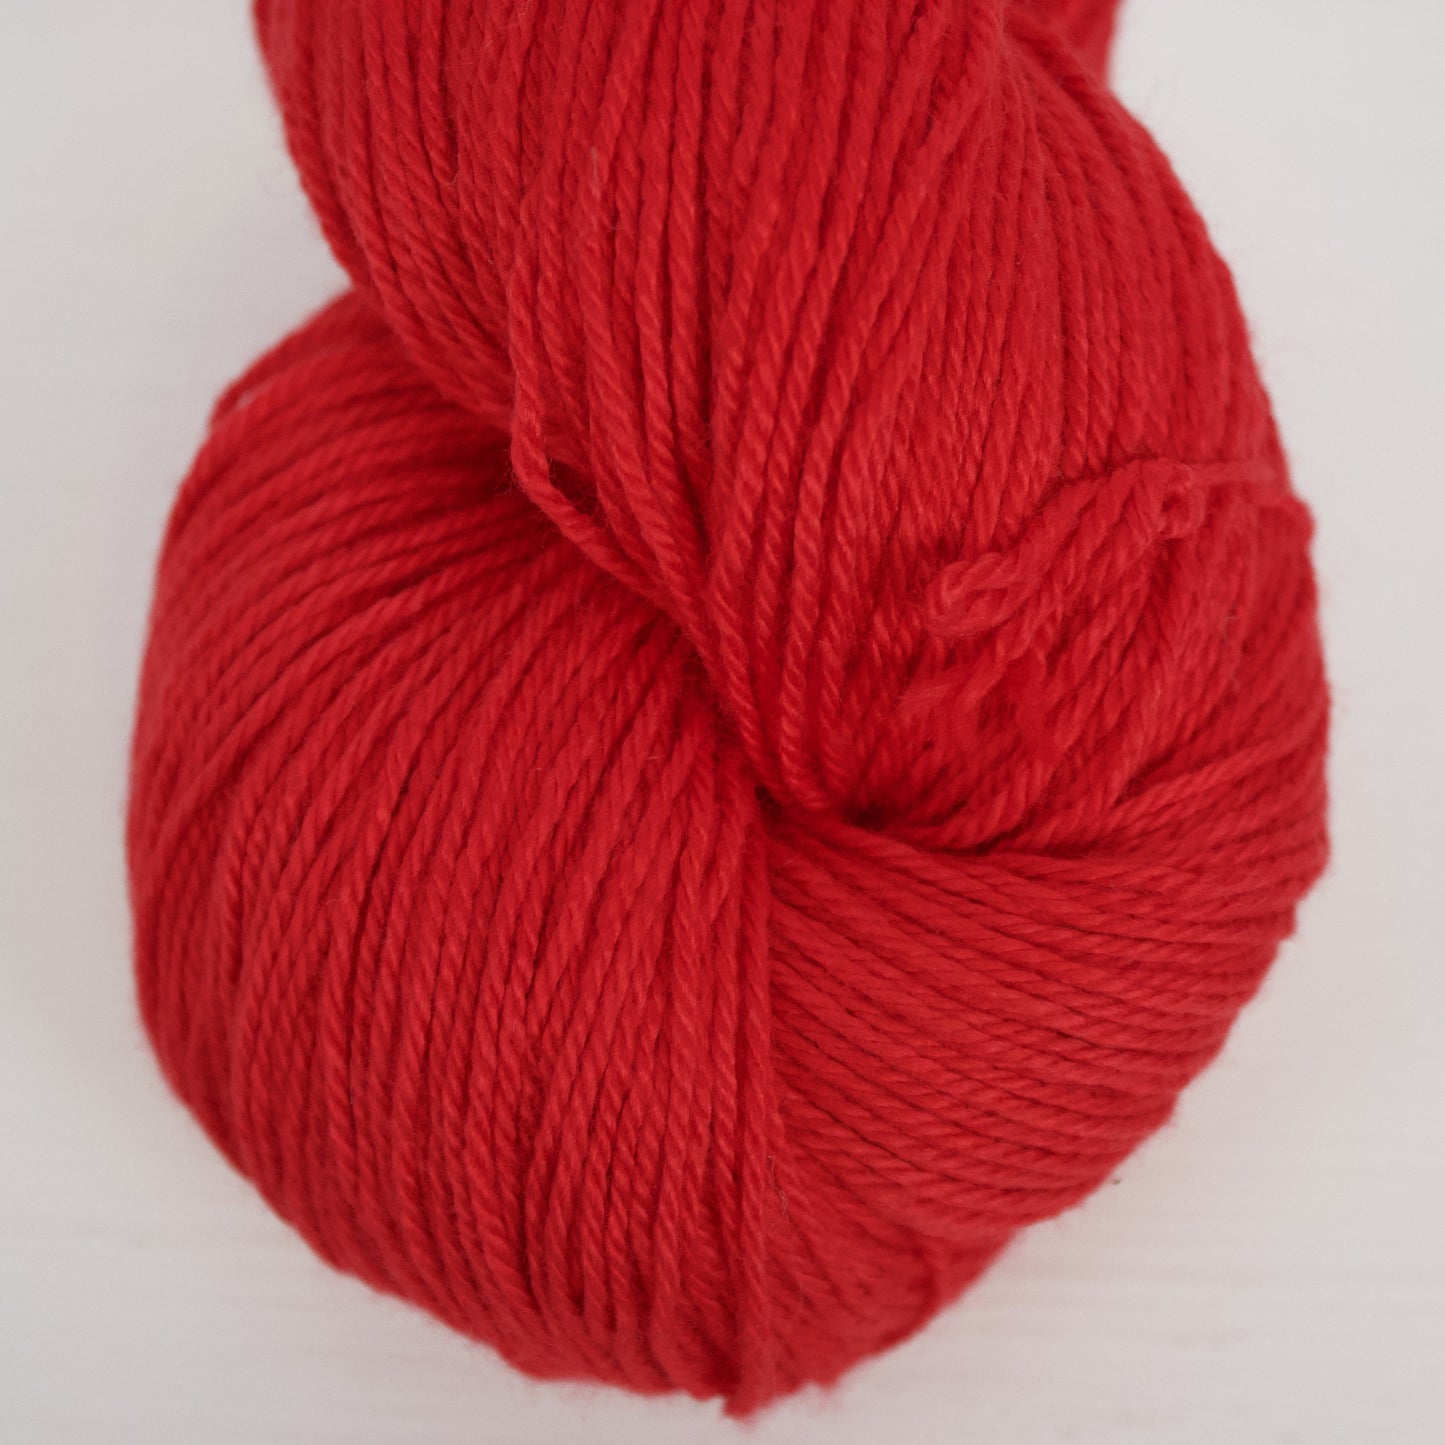 Firecracker - Albireo Fingering - Firecracker is an intense, classic red, only slightly semisolid for some visual texture.